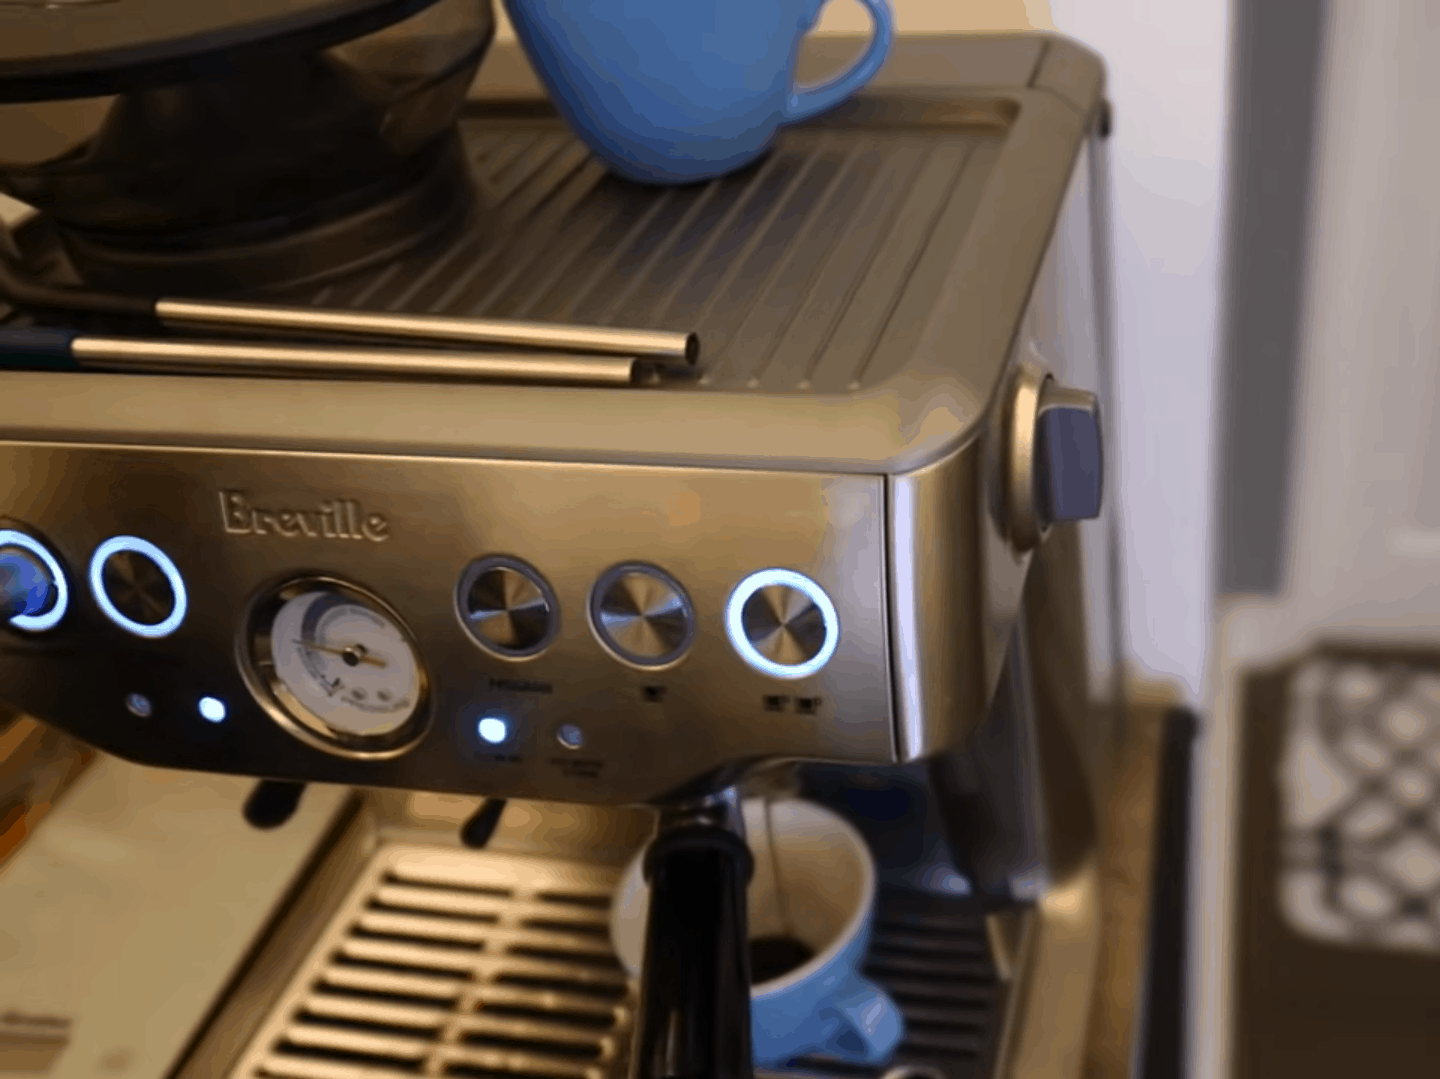 Breville Barista Express makes a cup of coffee